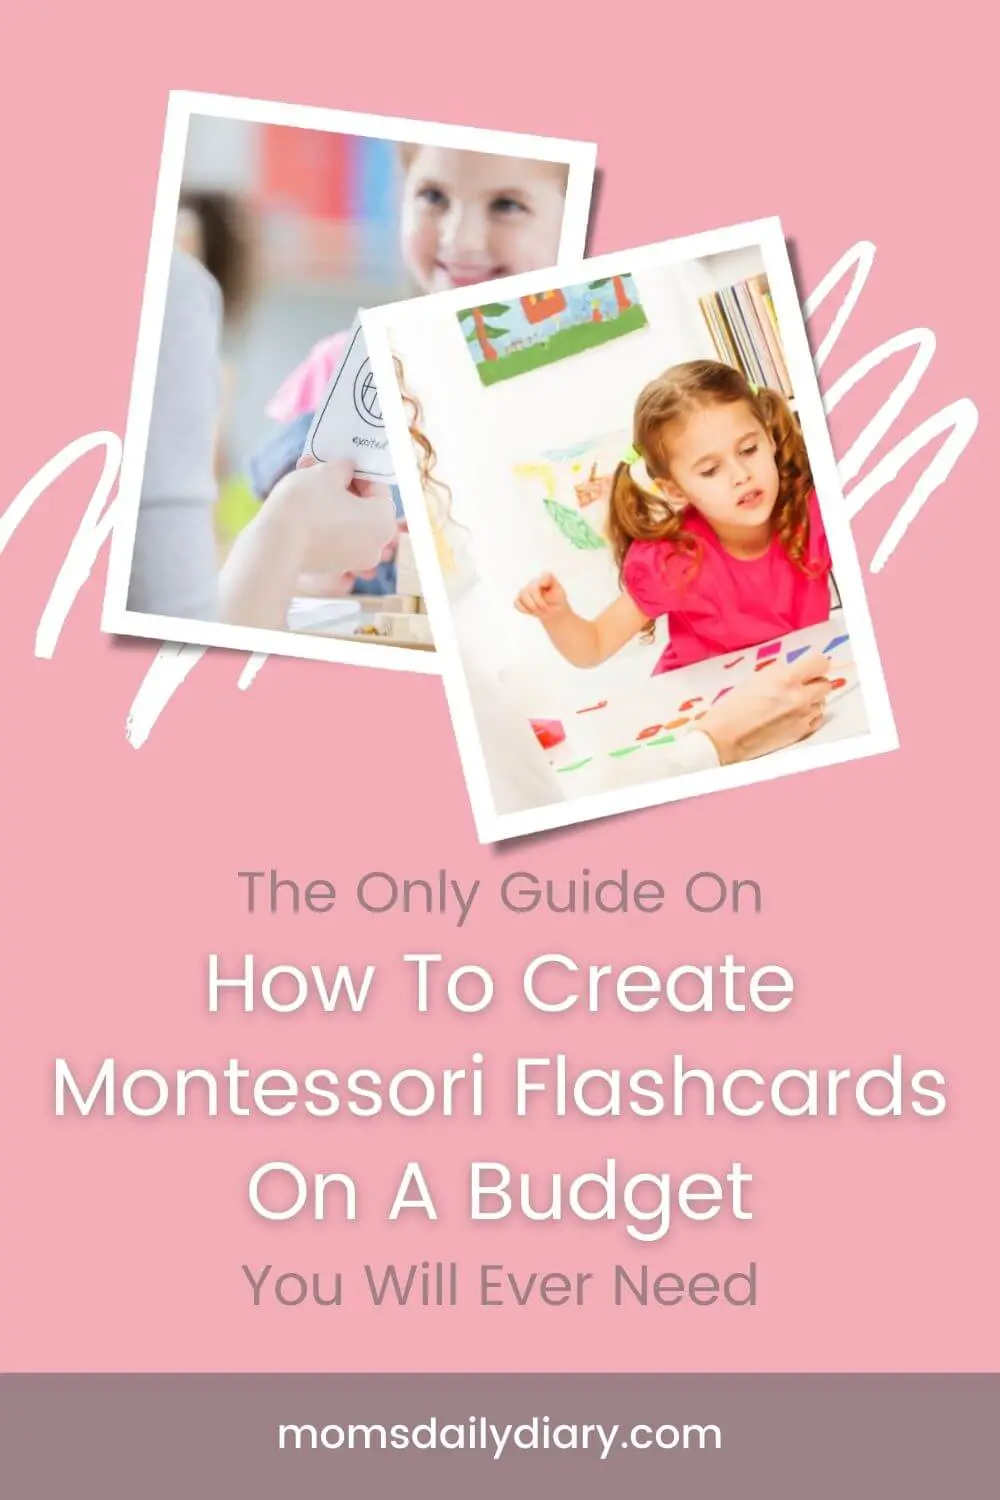 If you love language cards you don't have to spend a fortune. All you need is this complete guide on how to create Montessori flashcards on a budget.